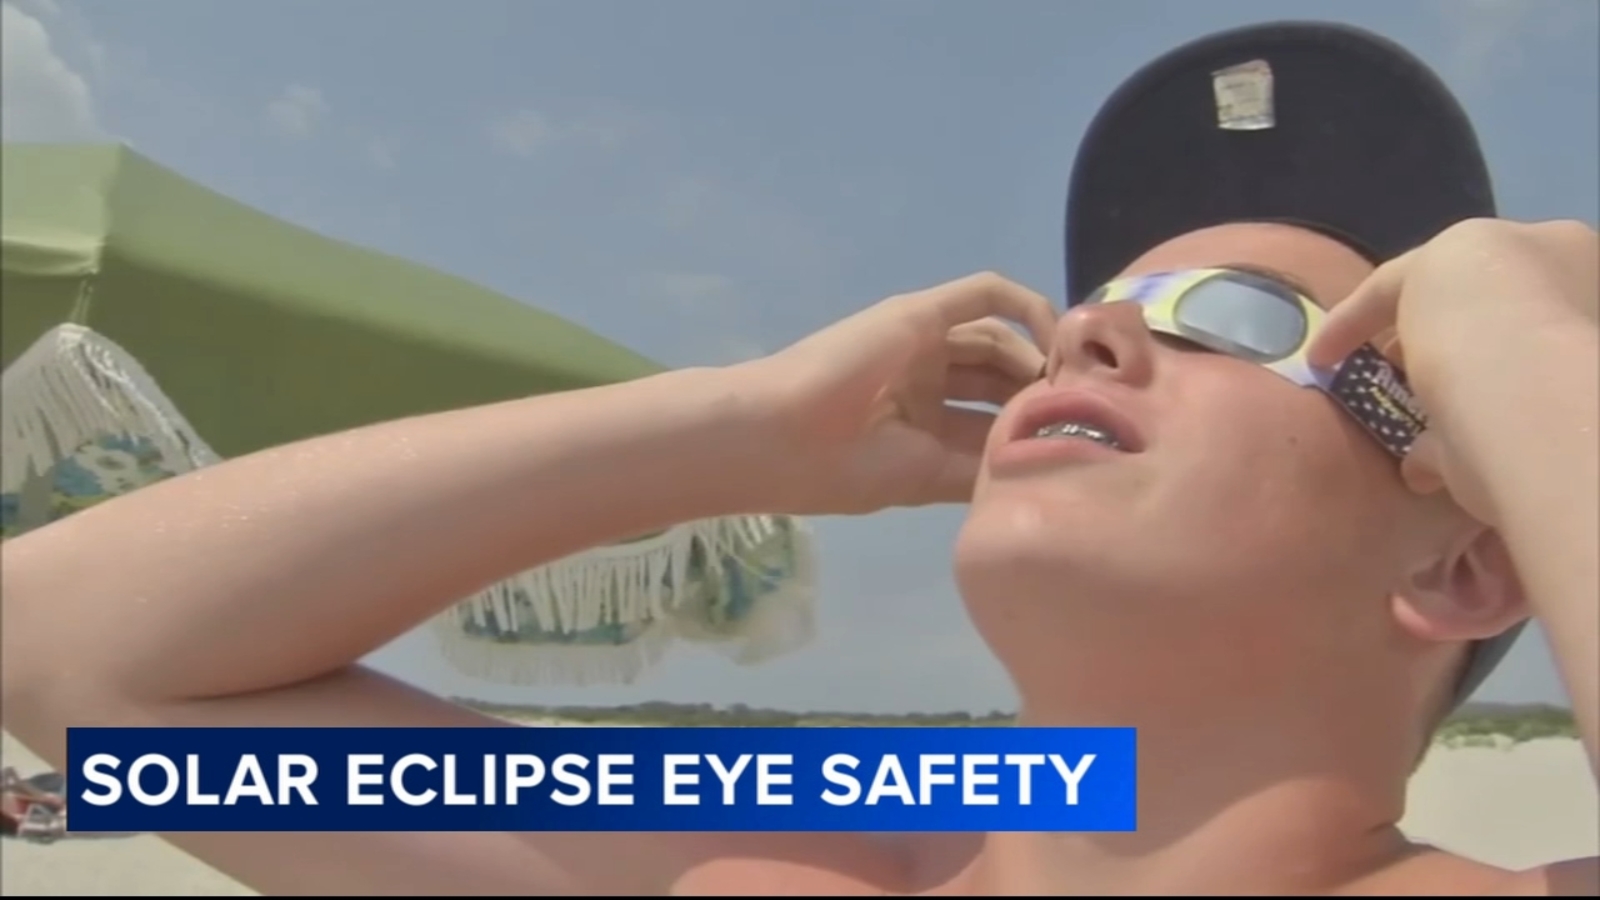 Solar eclipse glasses sold through Amazon, Illinois grocery stores recalled, Illinois Department of Public Health urging [Video]